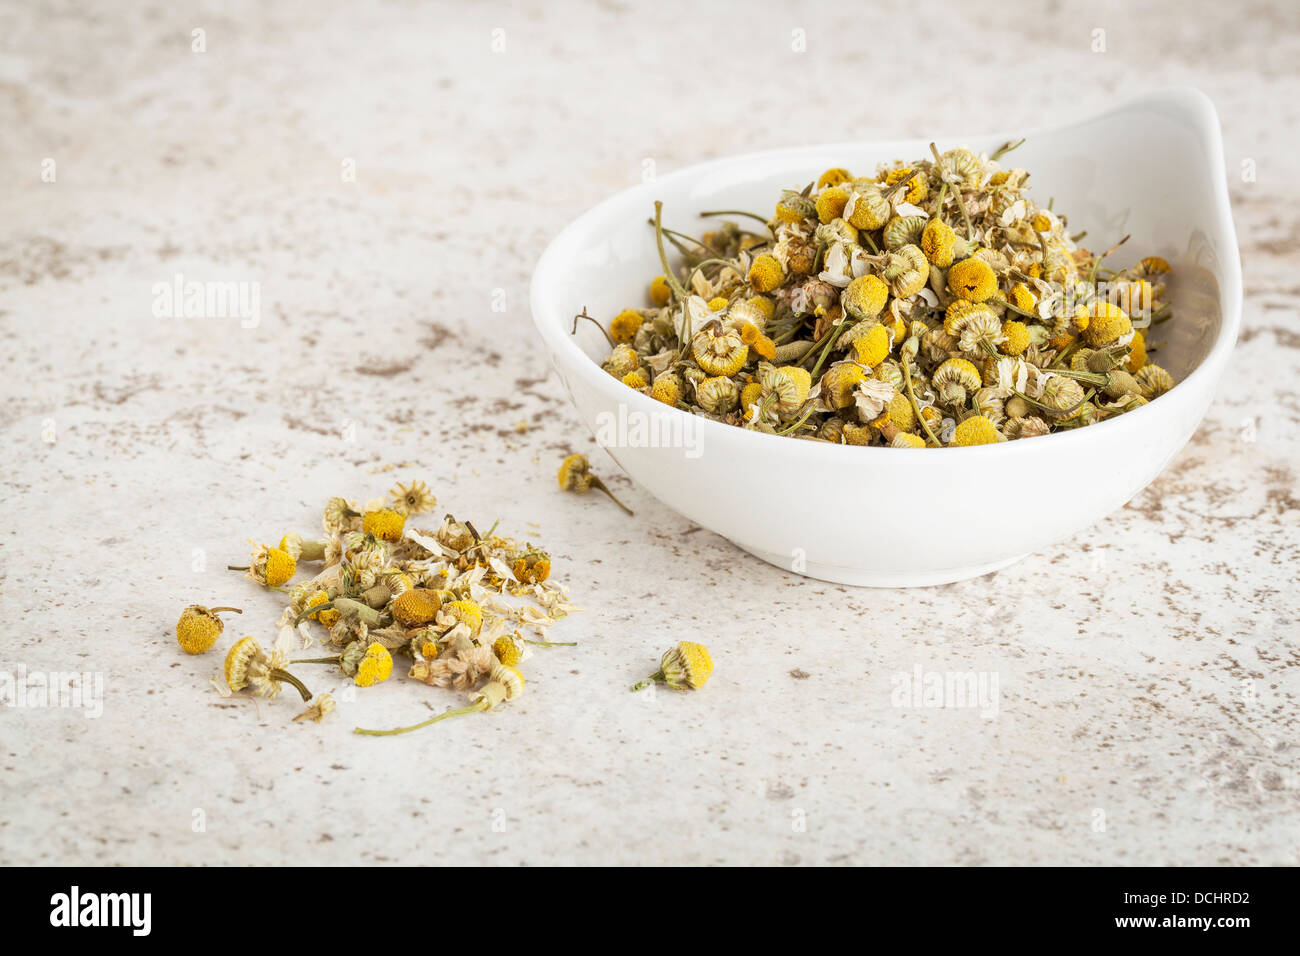 small ceramic bowl of dried chamomile flowers against a ceramic tile background Stock Photo